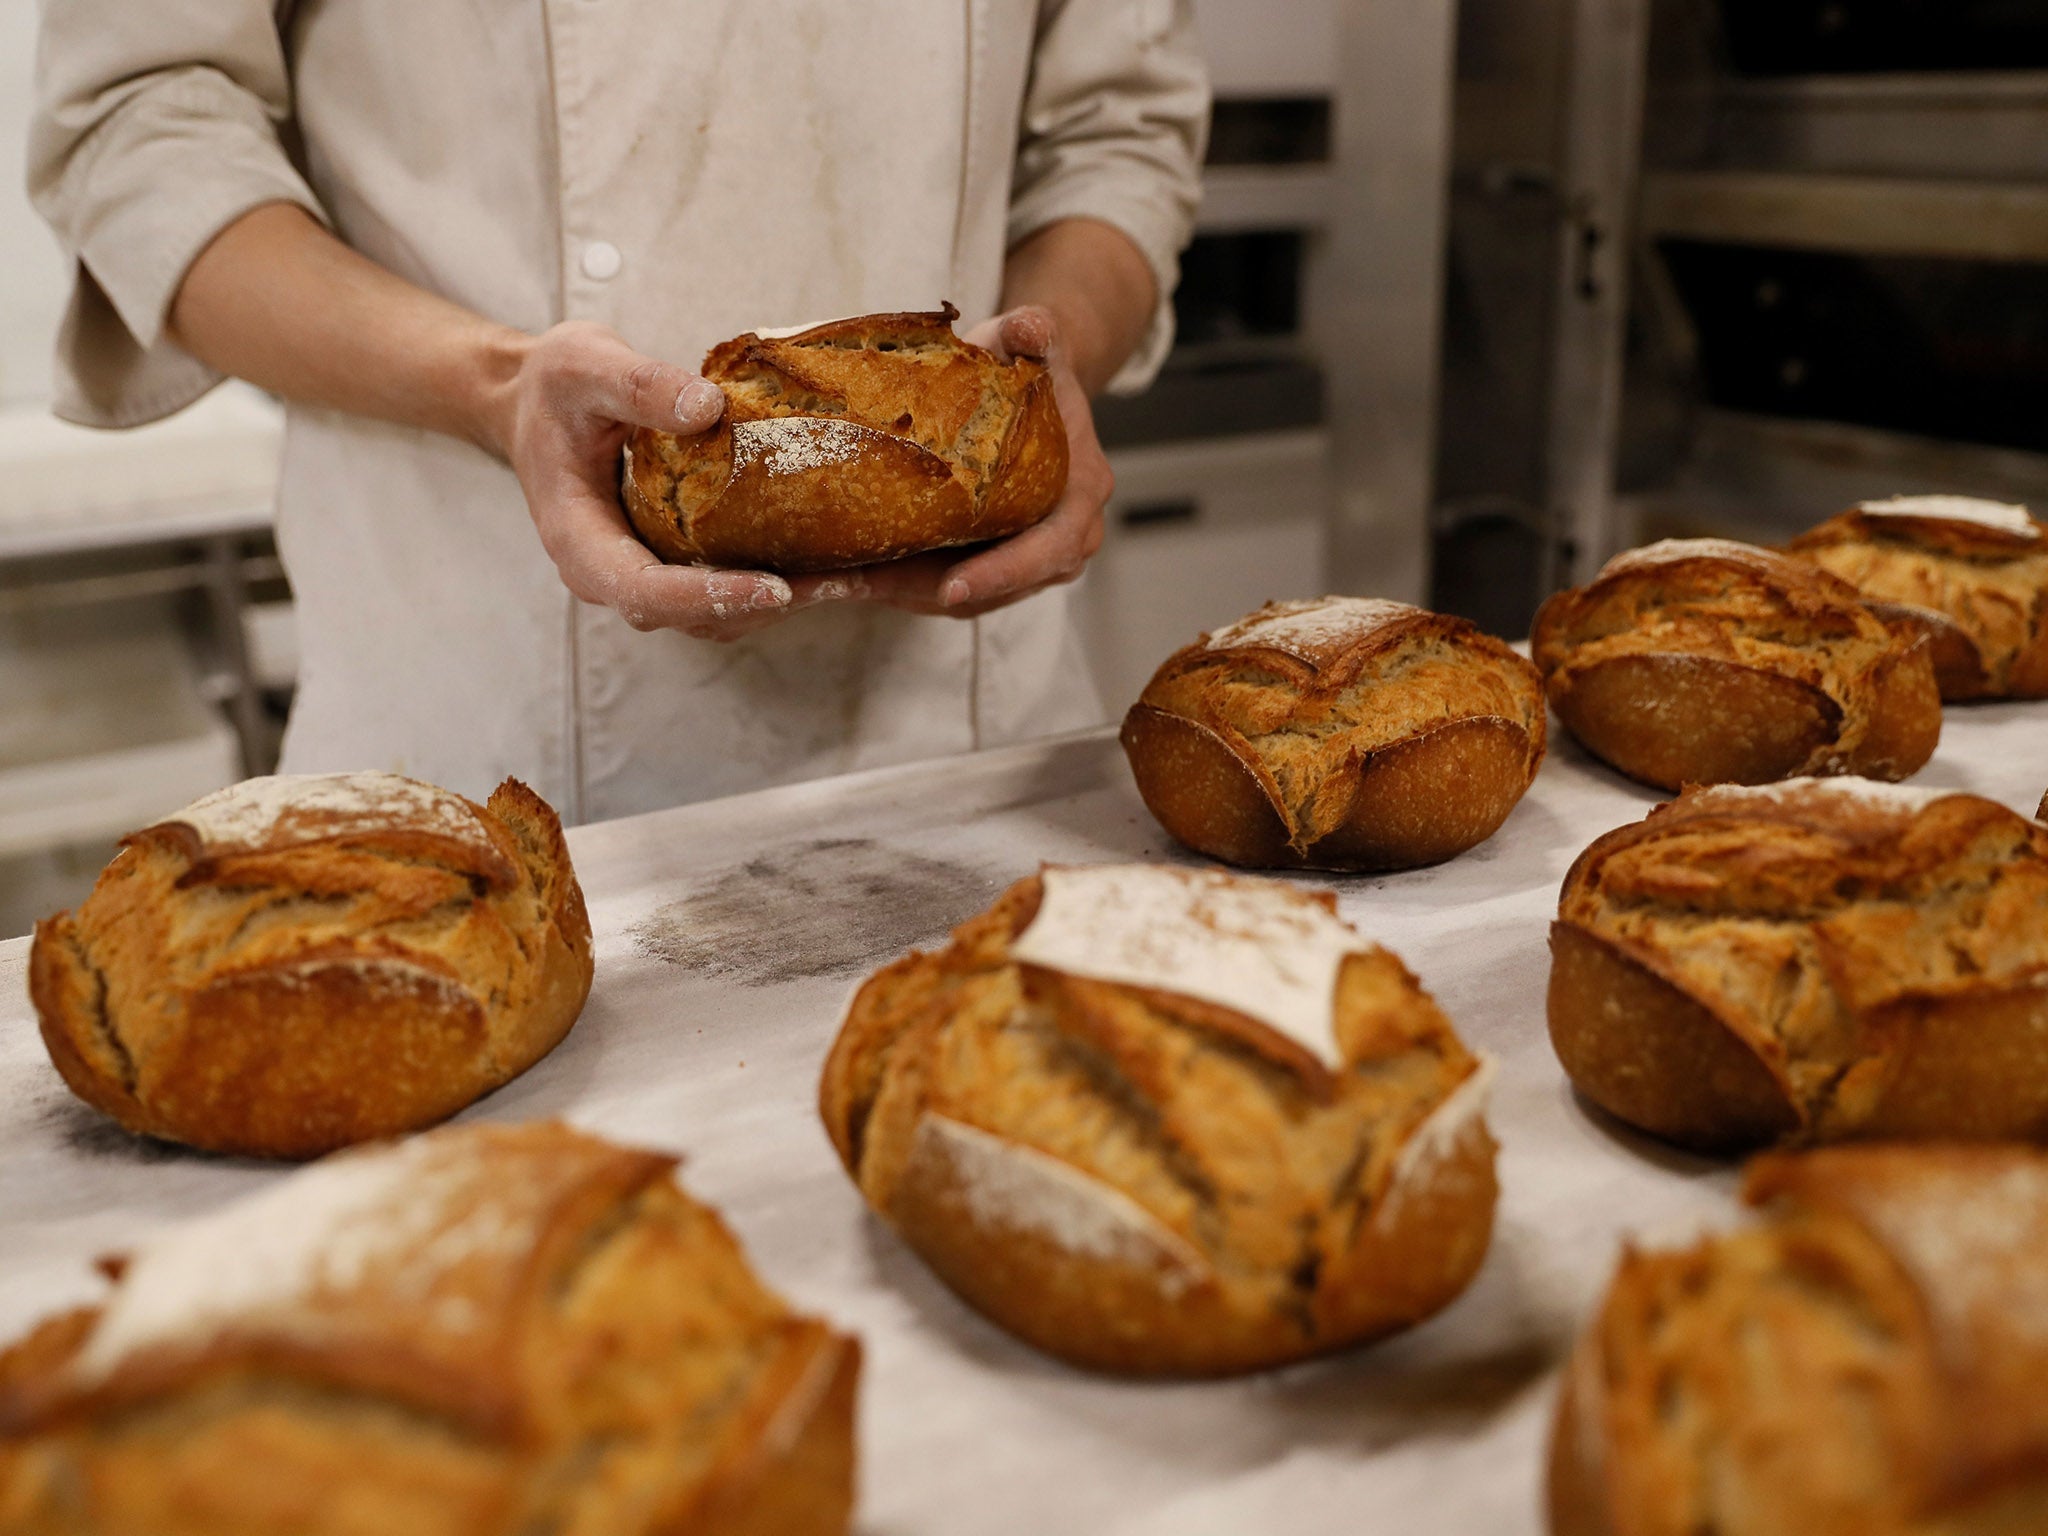 Fresh bread continues to be seen as a staple of French life, but little understand what’s going on behind the scenes